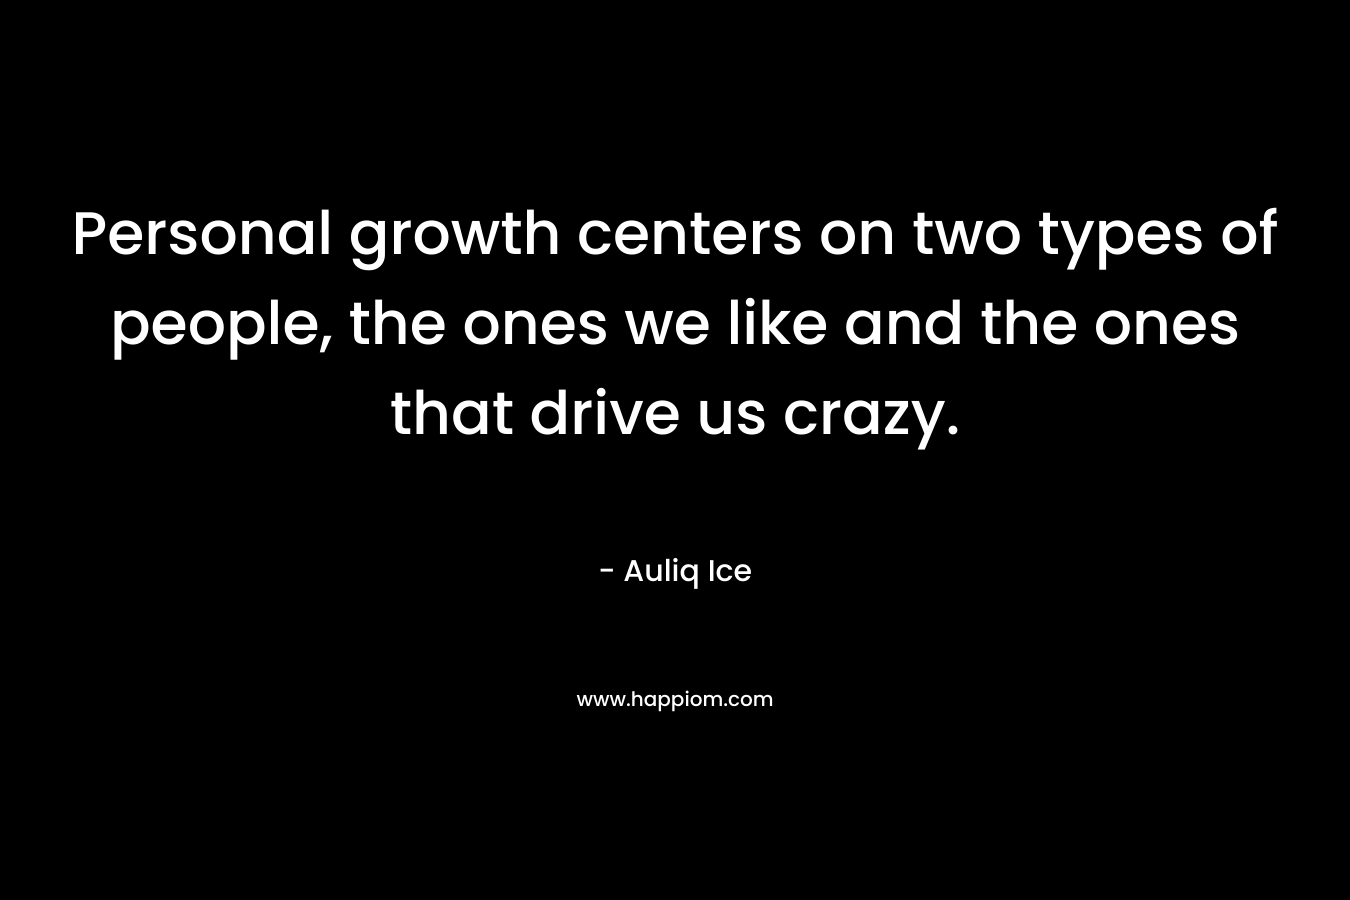 Personal growth centers on two types of people, the ones we like and the ones that drive us crazy. – Auliq Ice